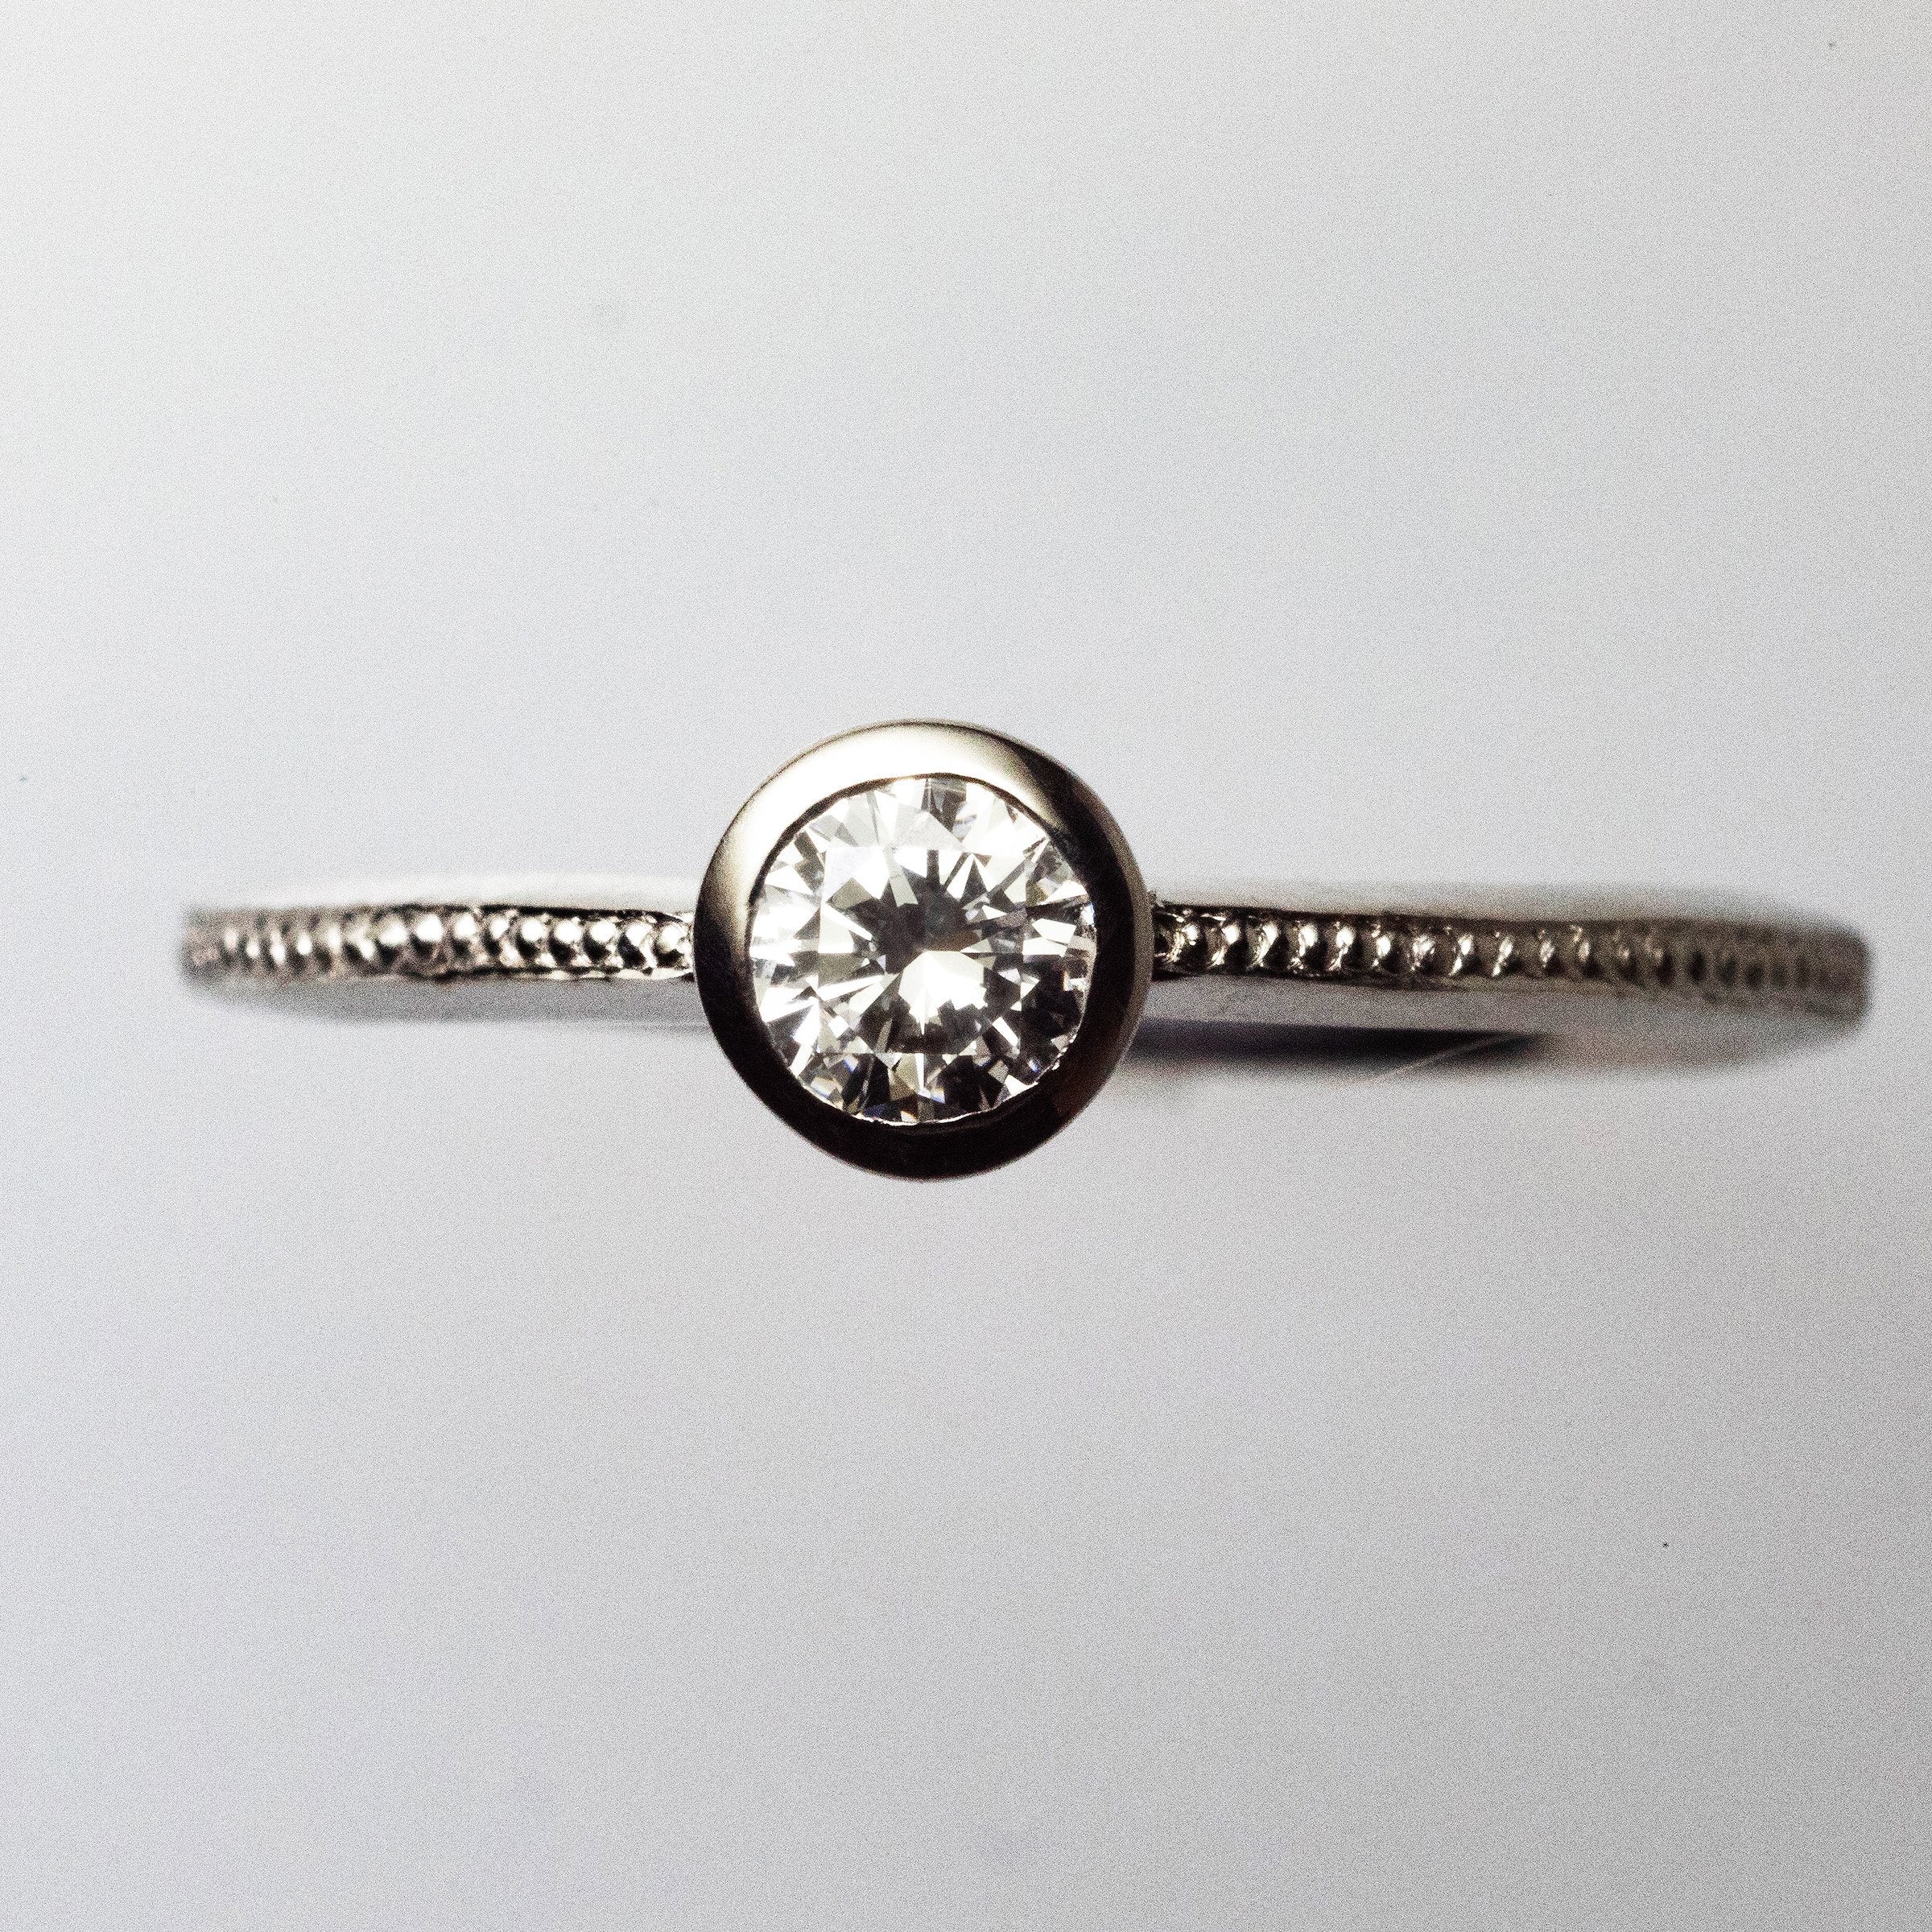 Platinum 0.2ct Solitaire Ring with Milgrain detail on Knife Edge